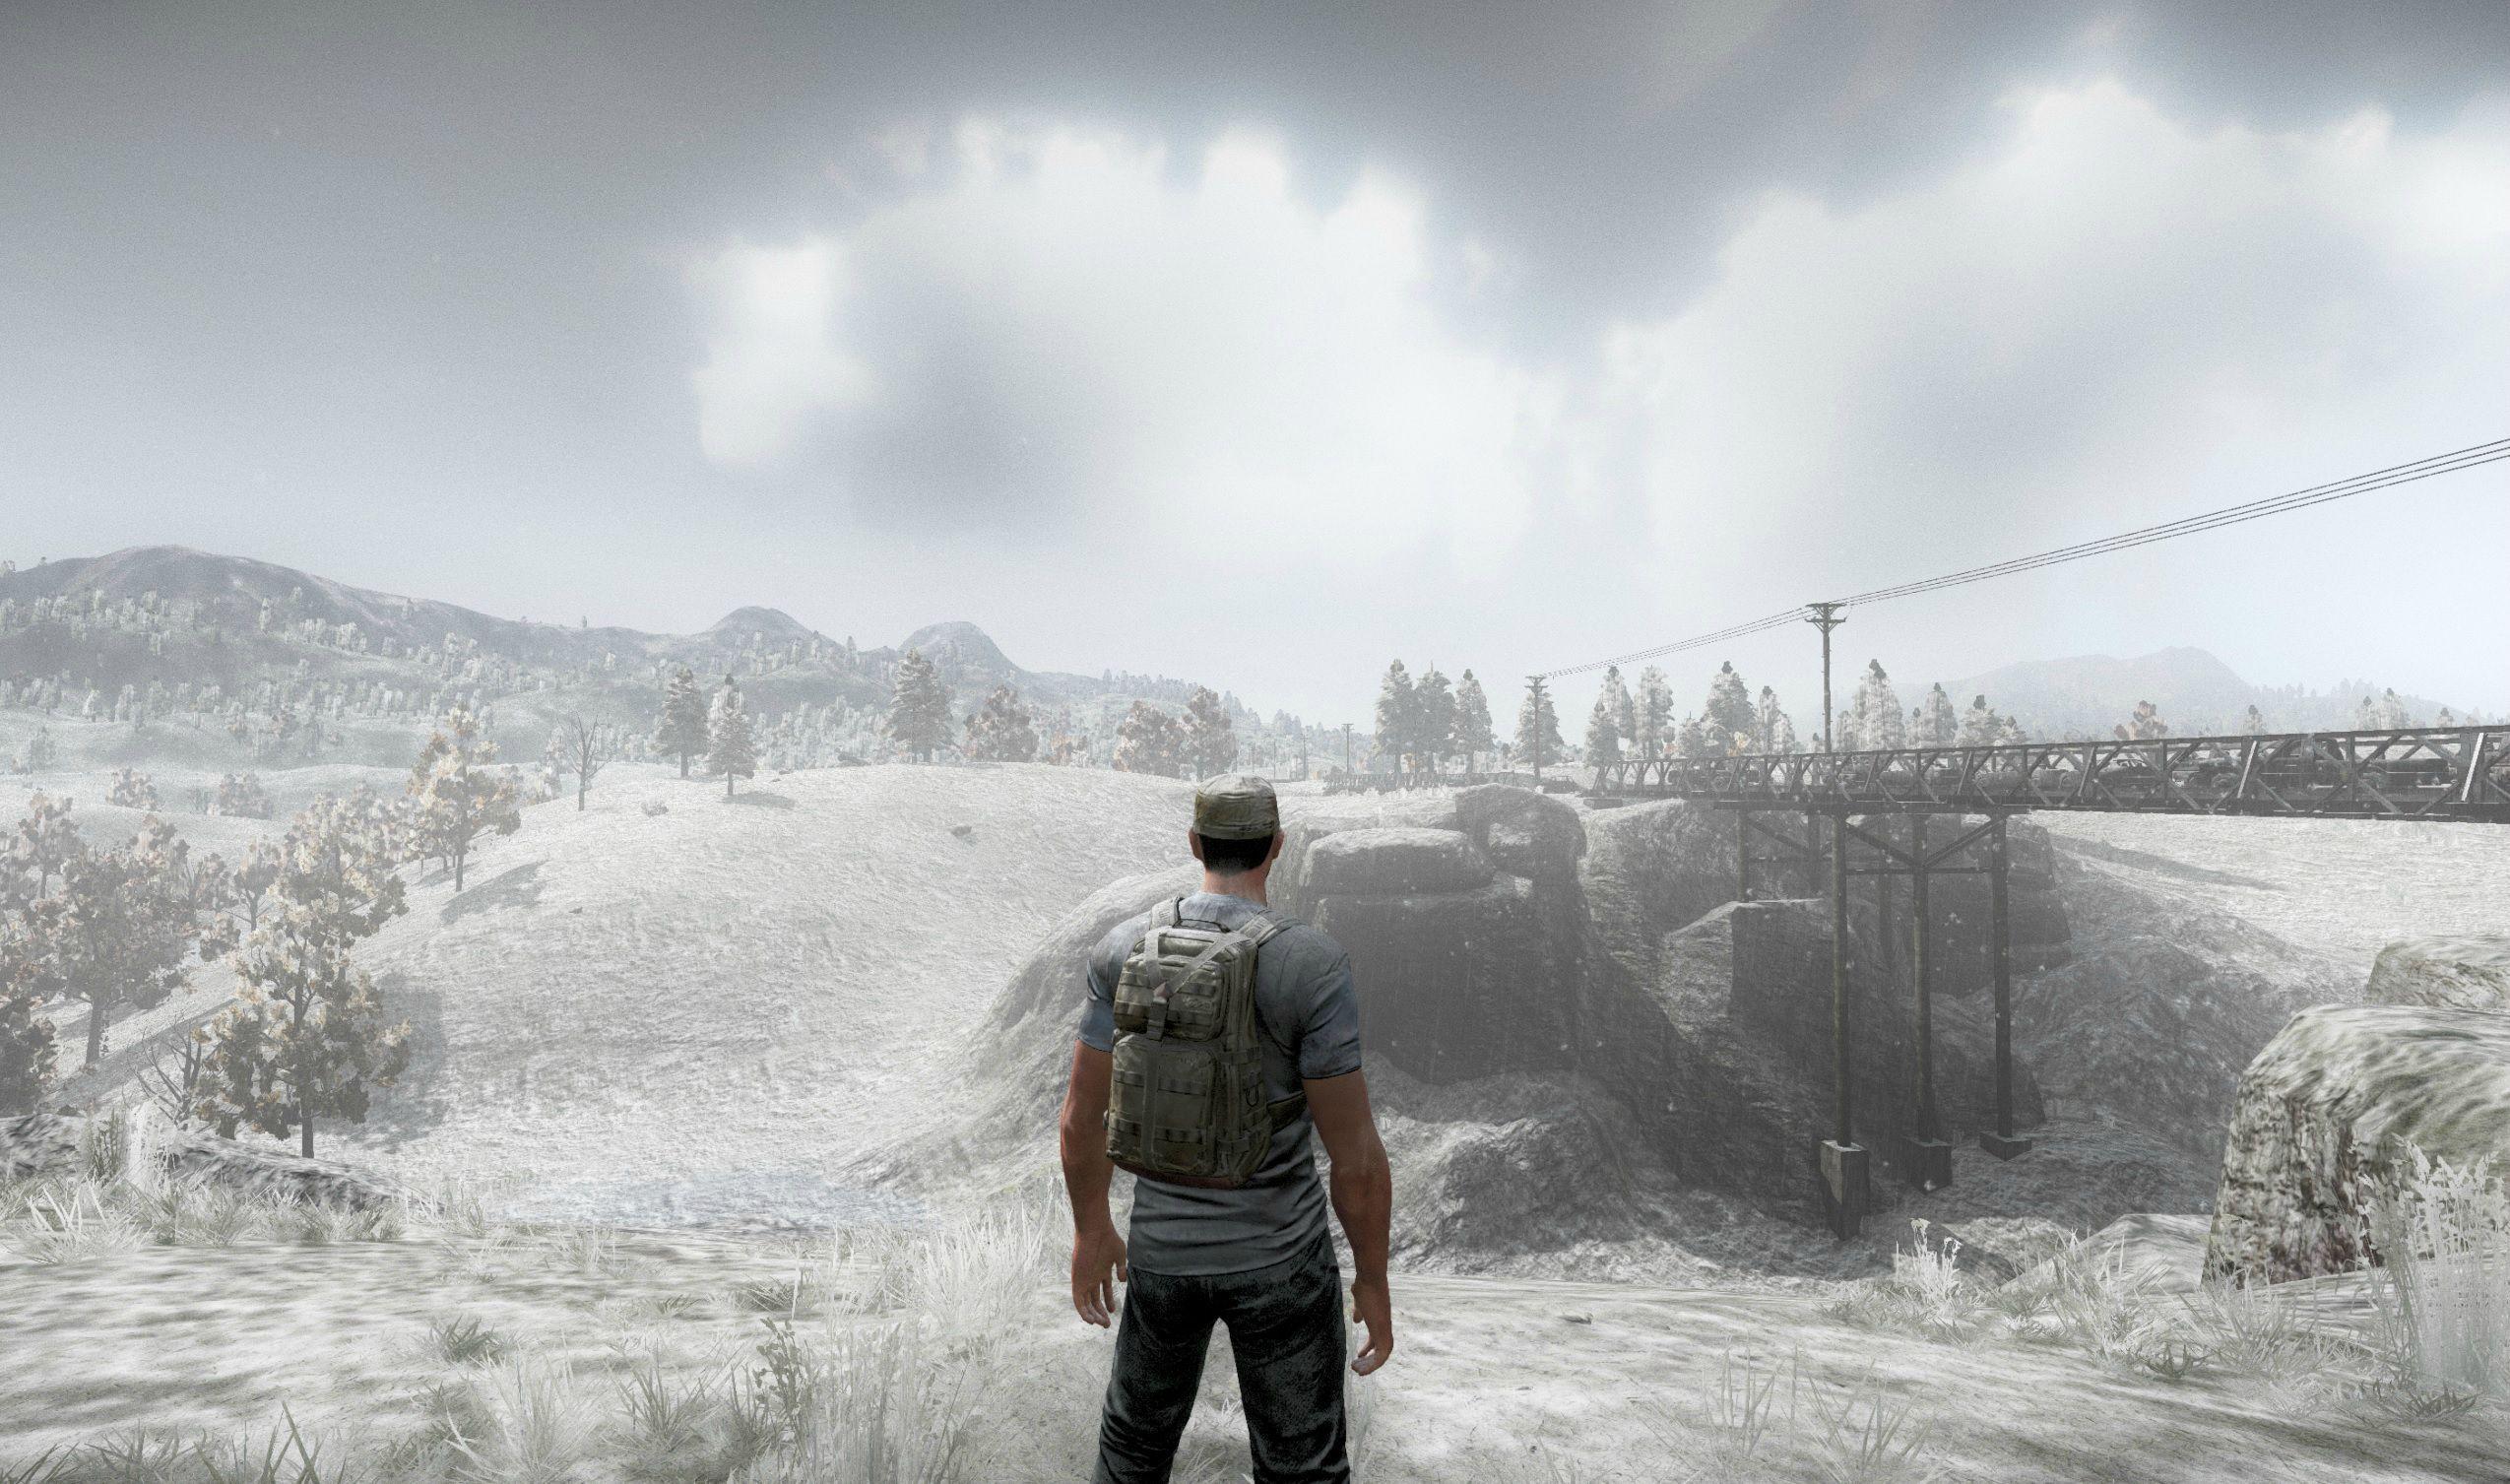 Weather changes in H1Z1 shown in new image